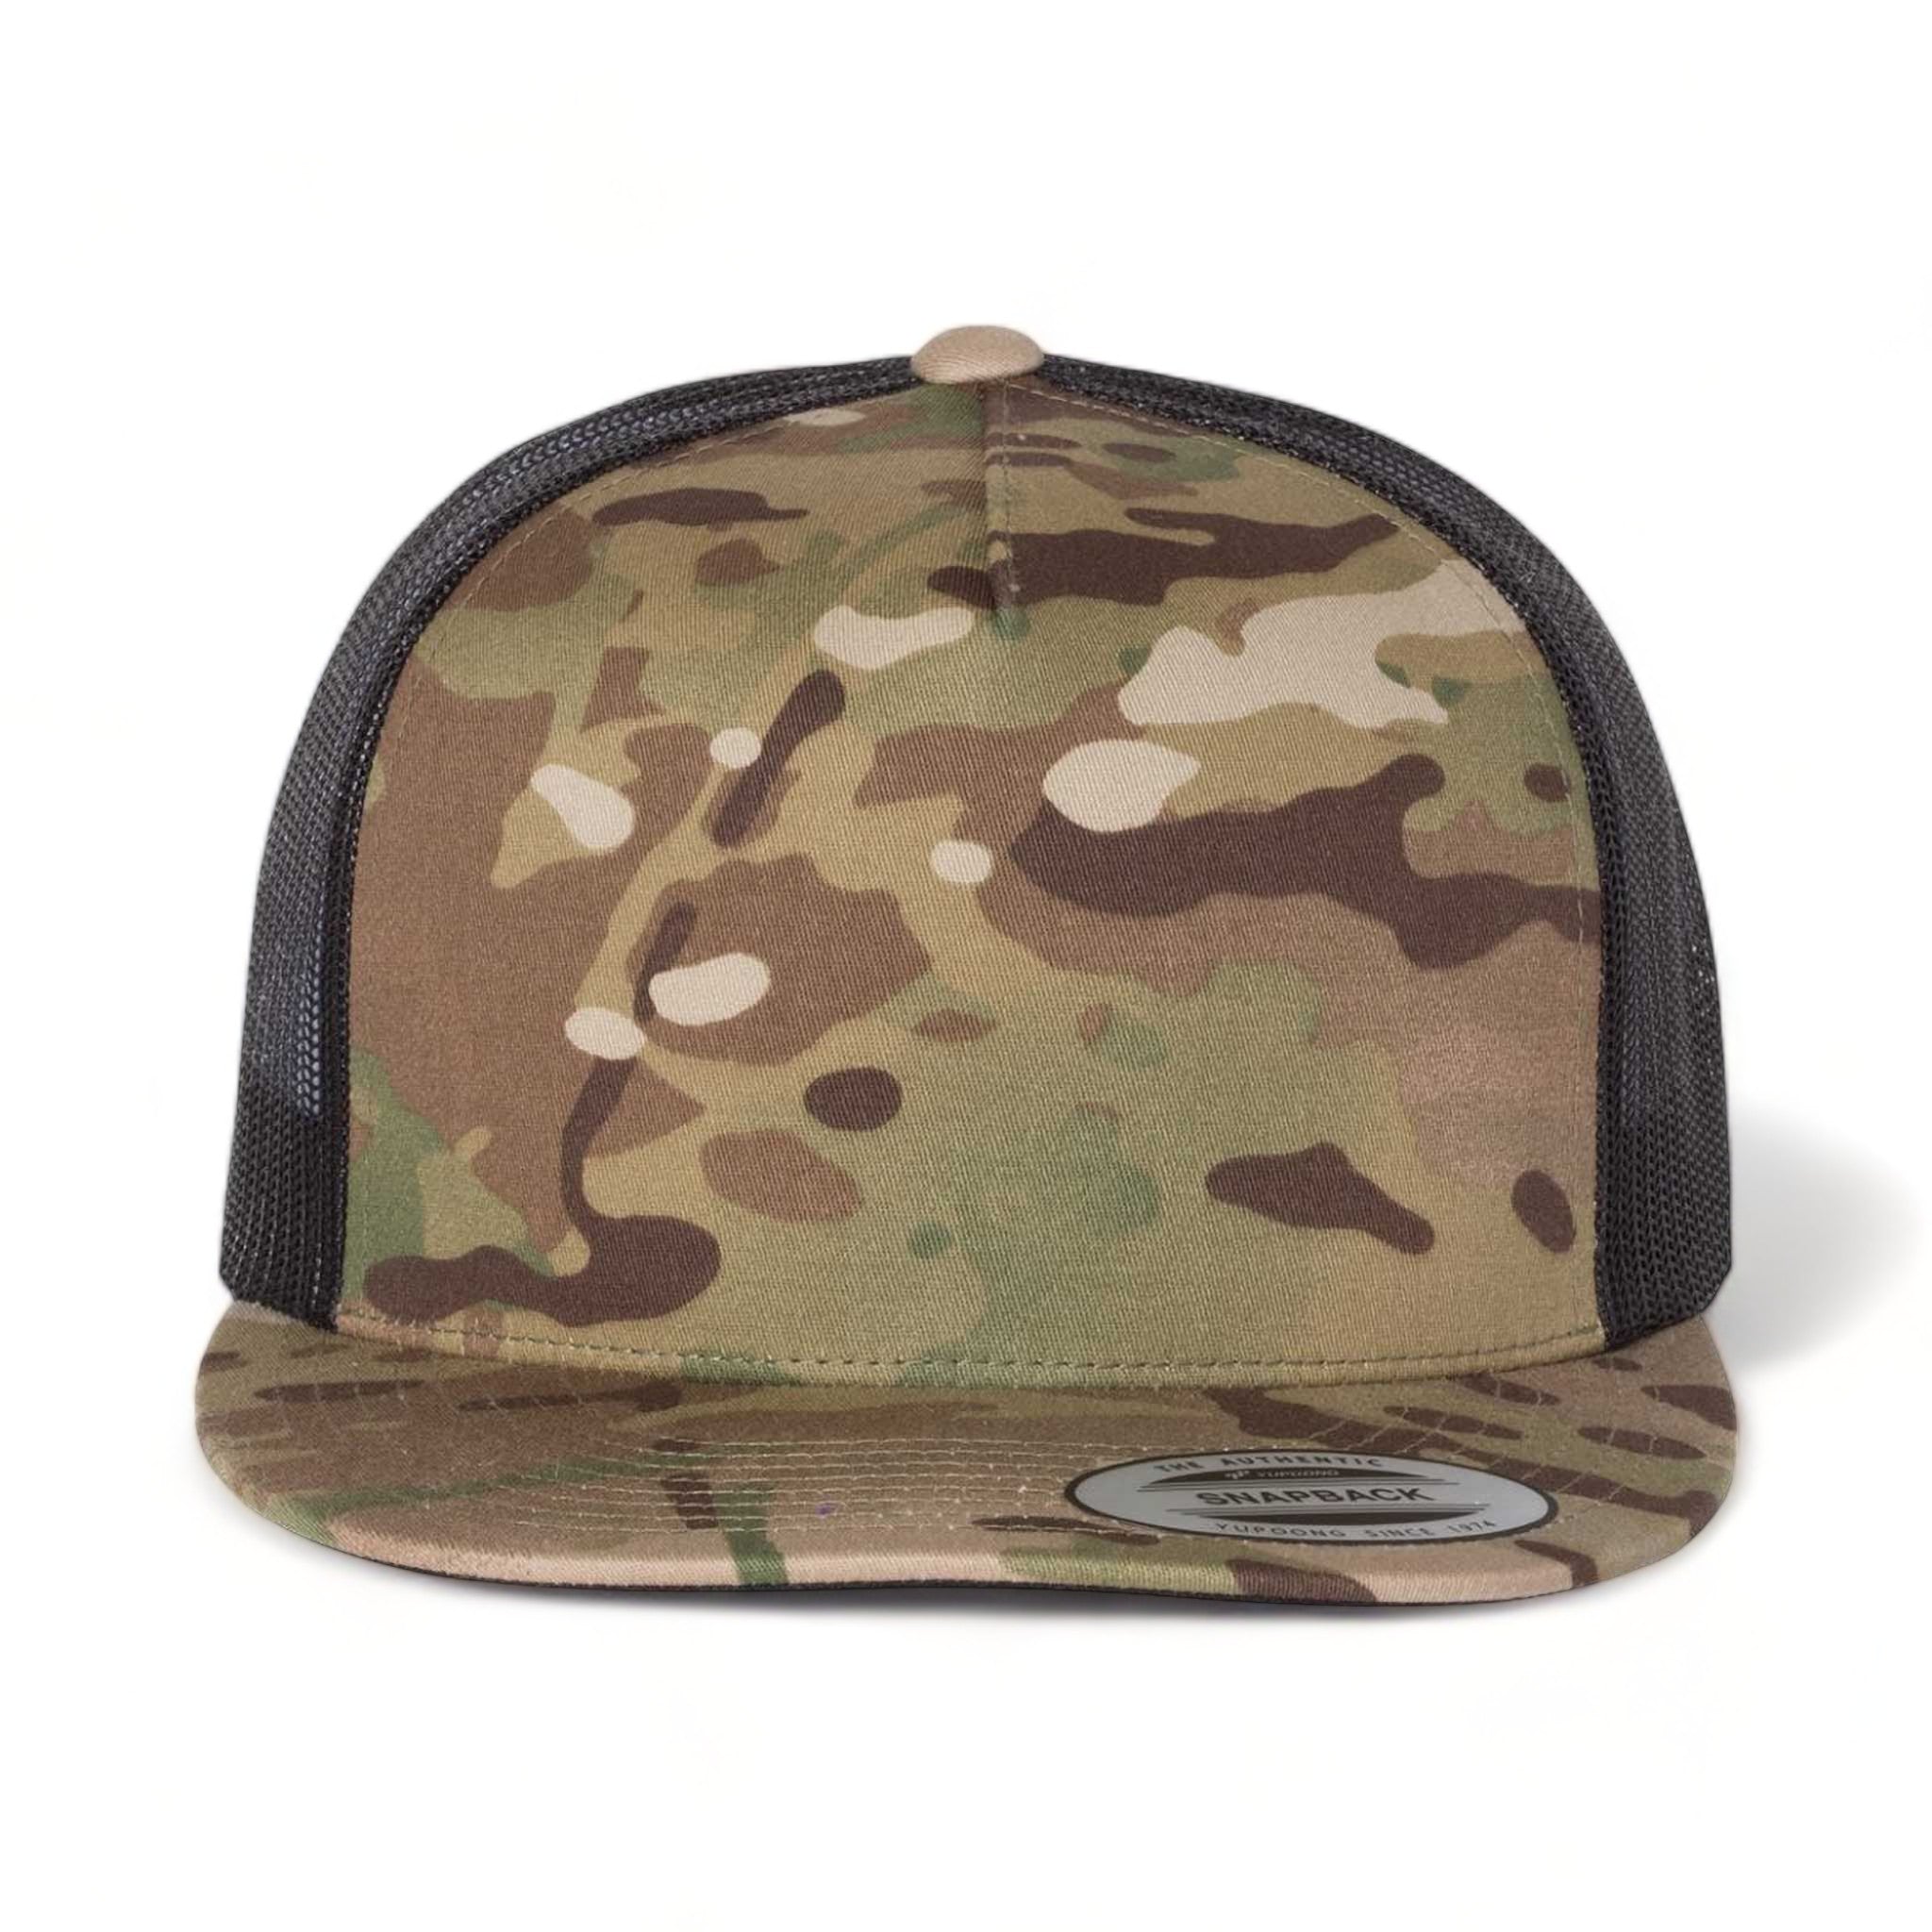 Front view of YP Classics 6006 custom hat in multicam green and black